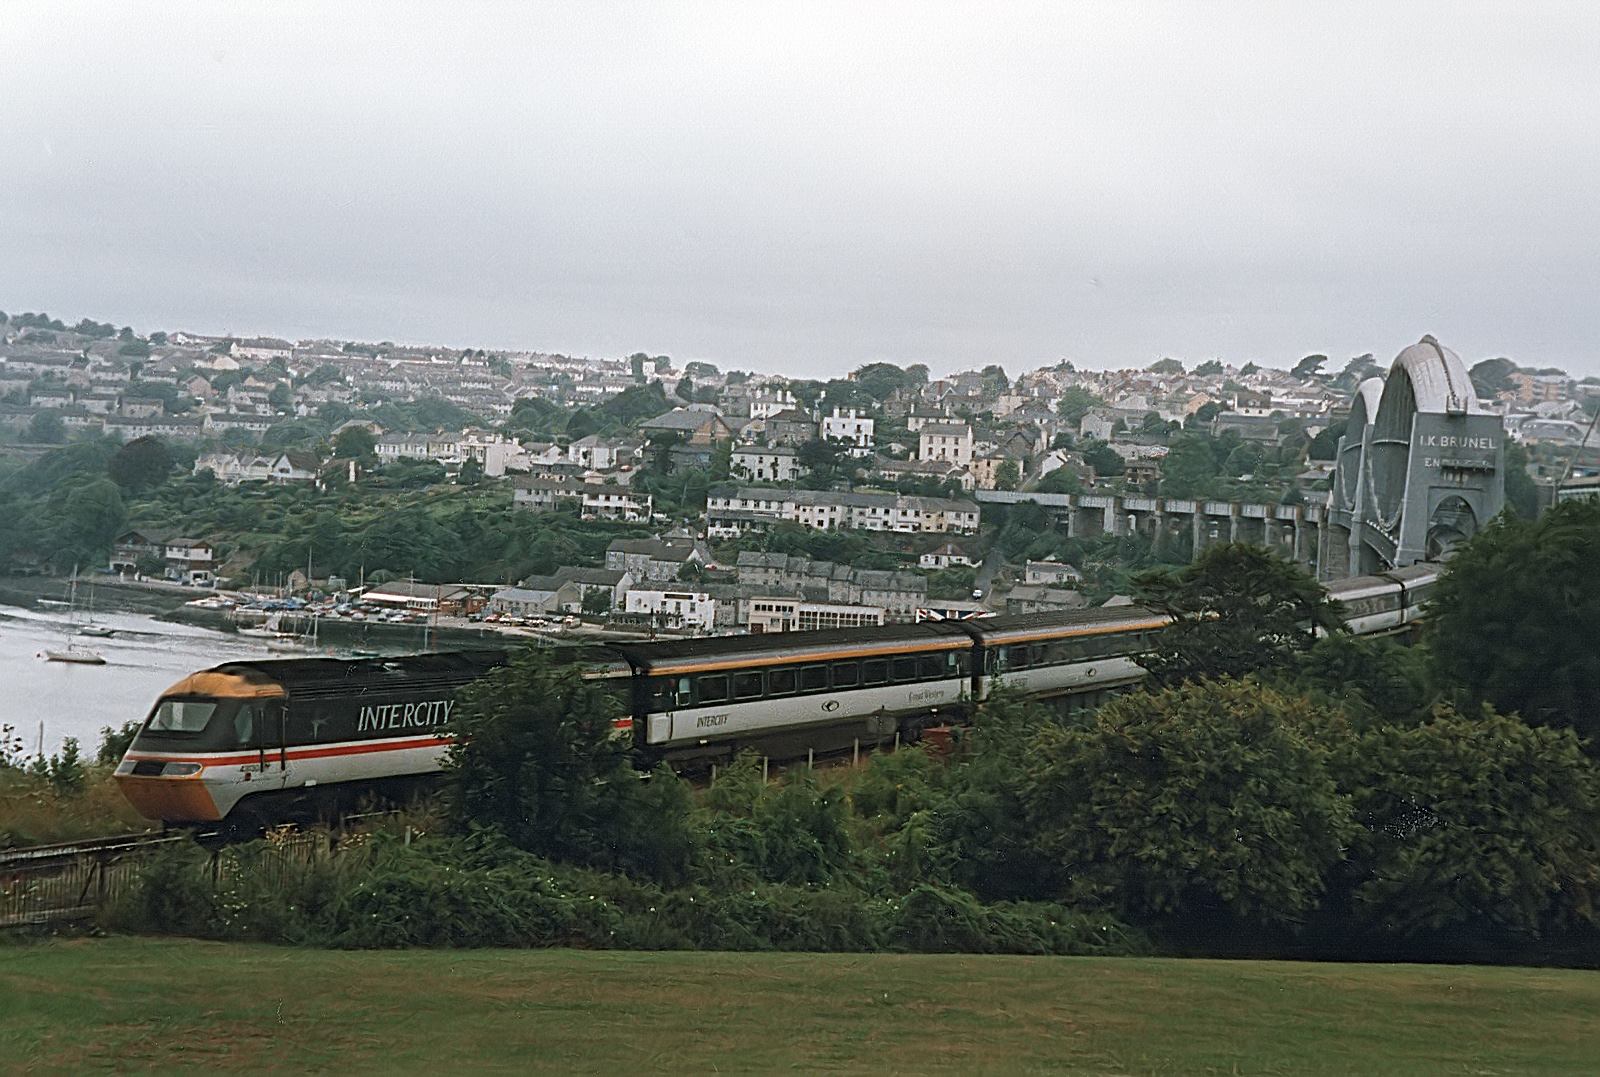 Power car 43130 brings up the rear of a Penzance bound express, about to cross the Tamar river by the Isambard Kingdom Brunel bridge. Typical of this period in the late 90's, the coaches are in the new (at the time) Great Western livery, however the power car has yet to visit the paint shops, remaining in Intercity Swallow livery.